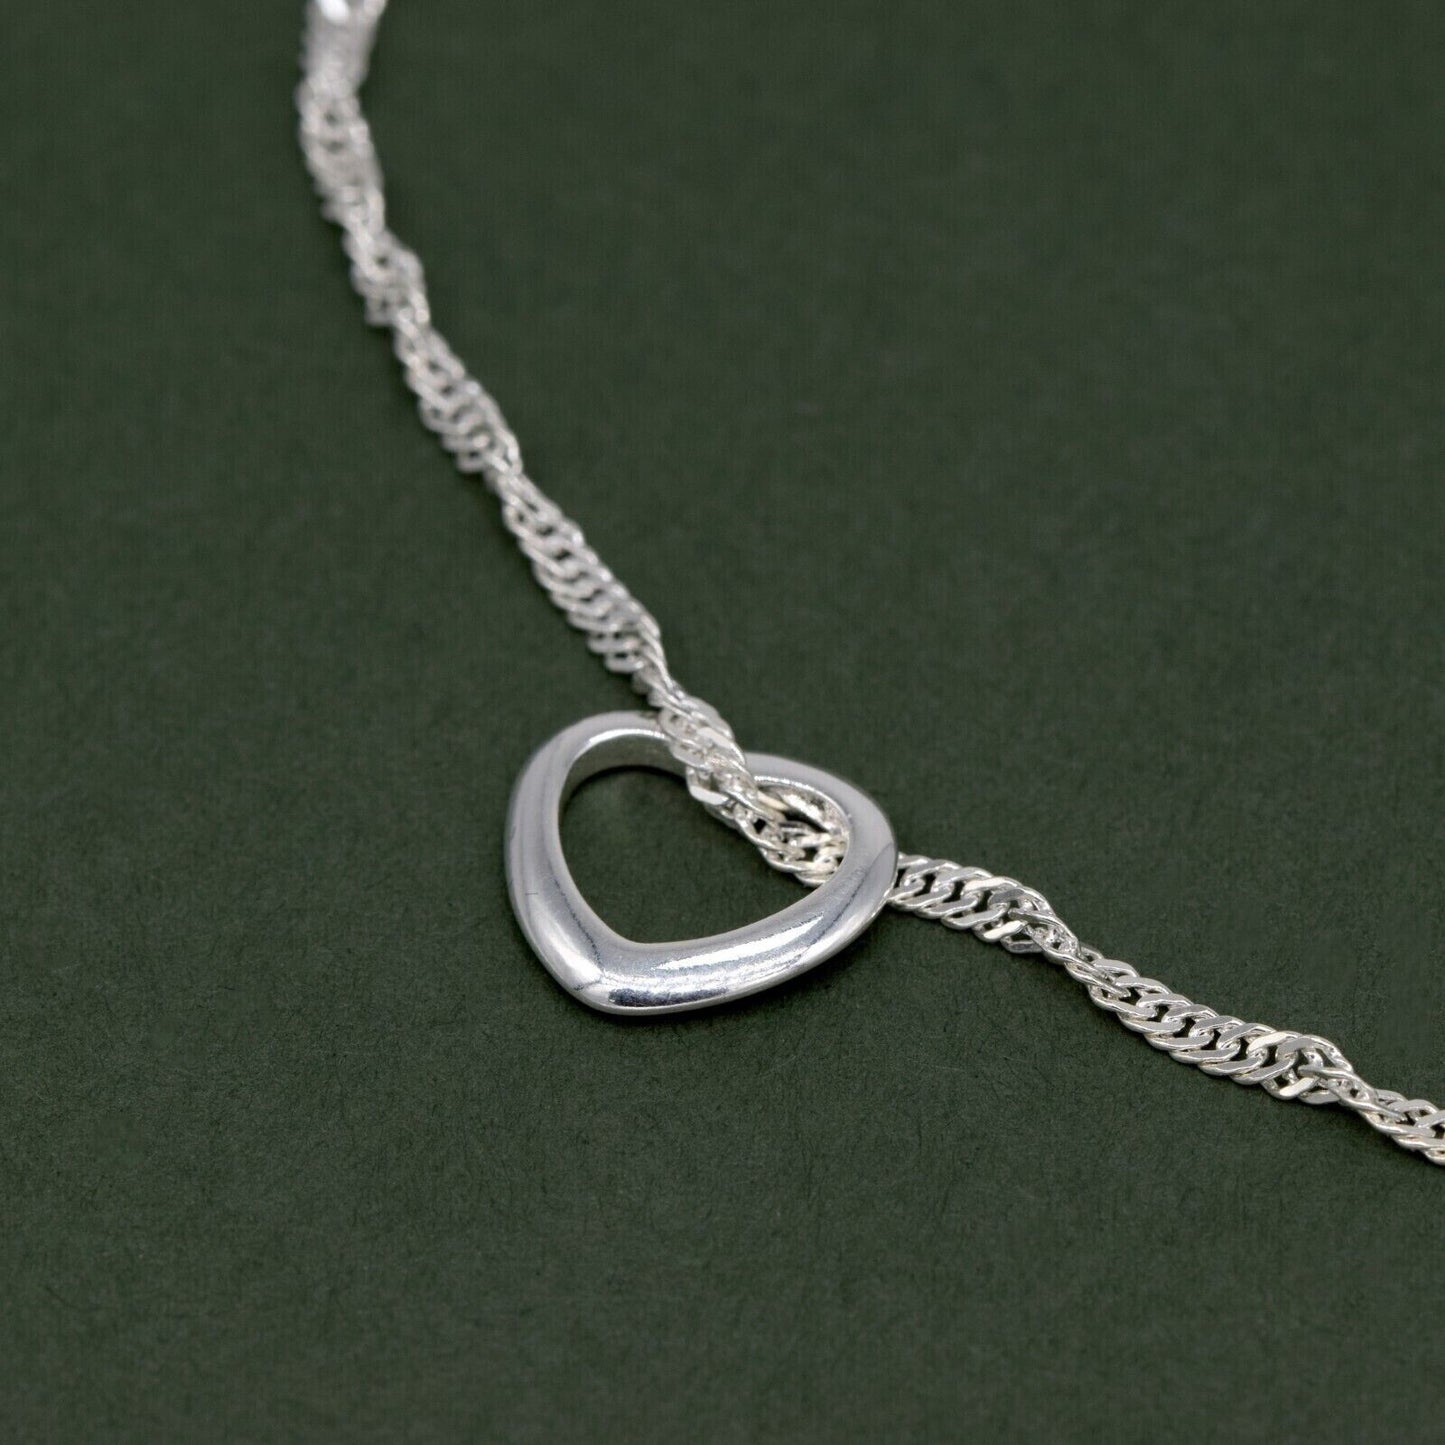 Genuine 925 Sterling Silver 10" Singapore Chain Anklet W/ Floating Heart Pendant